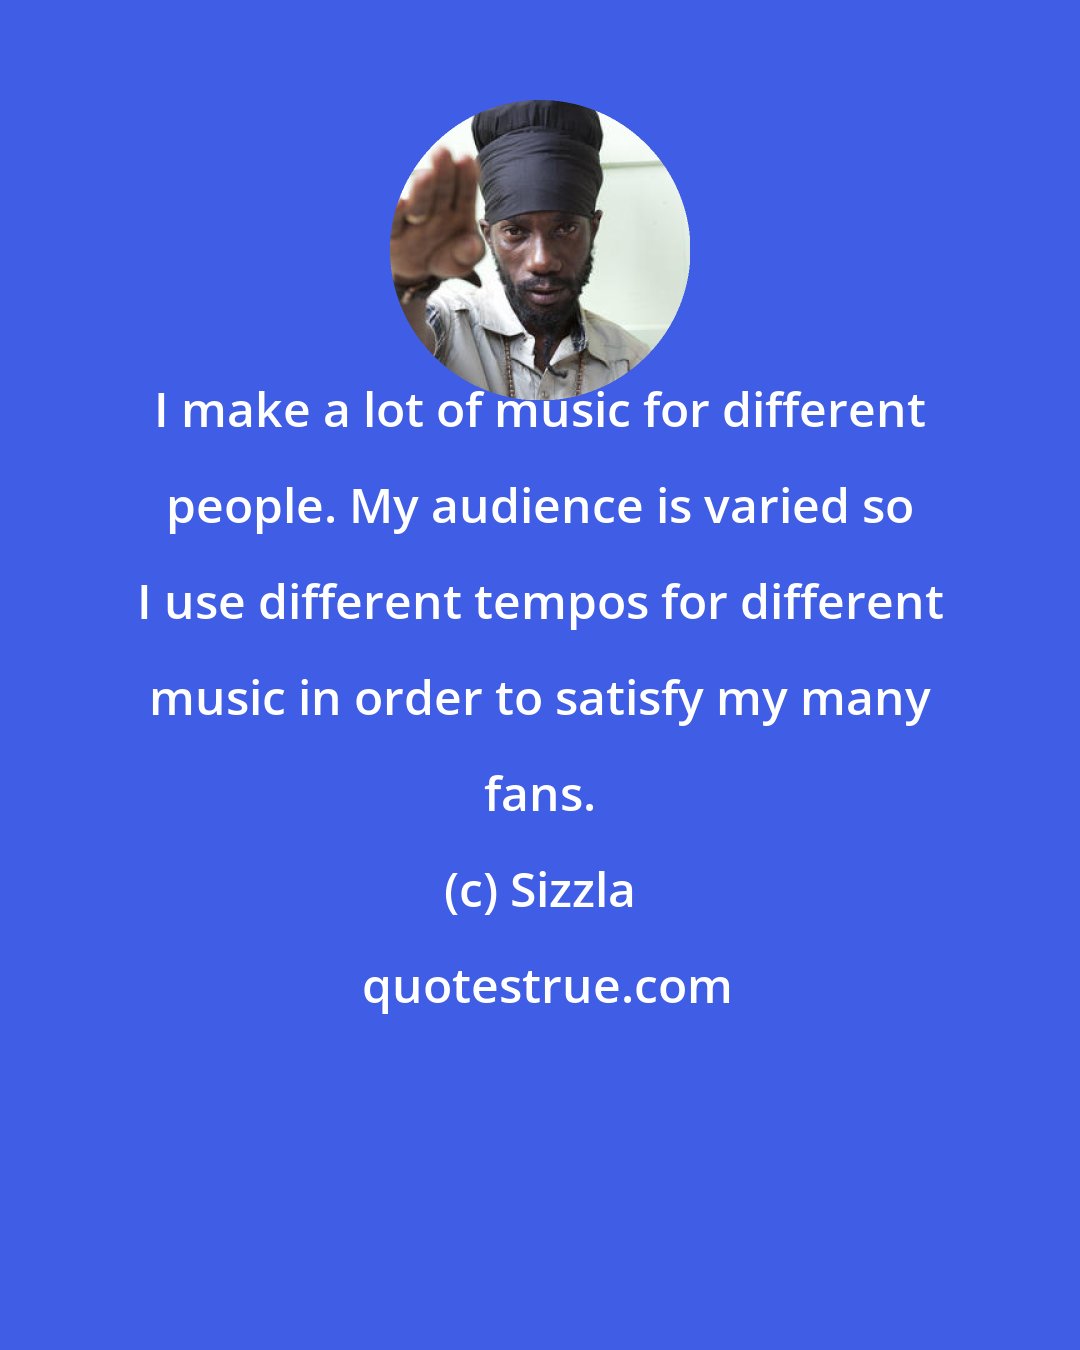 Sizzla: I make a lot of music for different people. My audience is varied so I use different tempos for different music in order to satisfy my many fans.